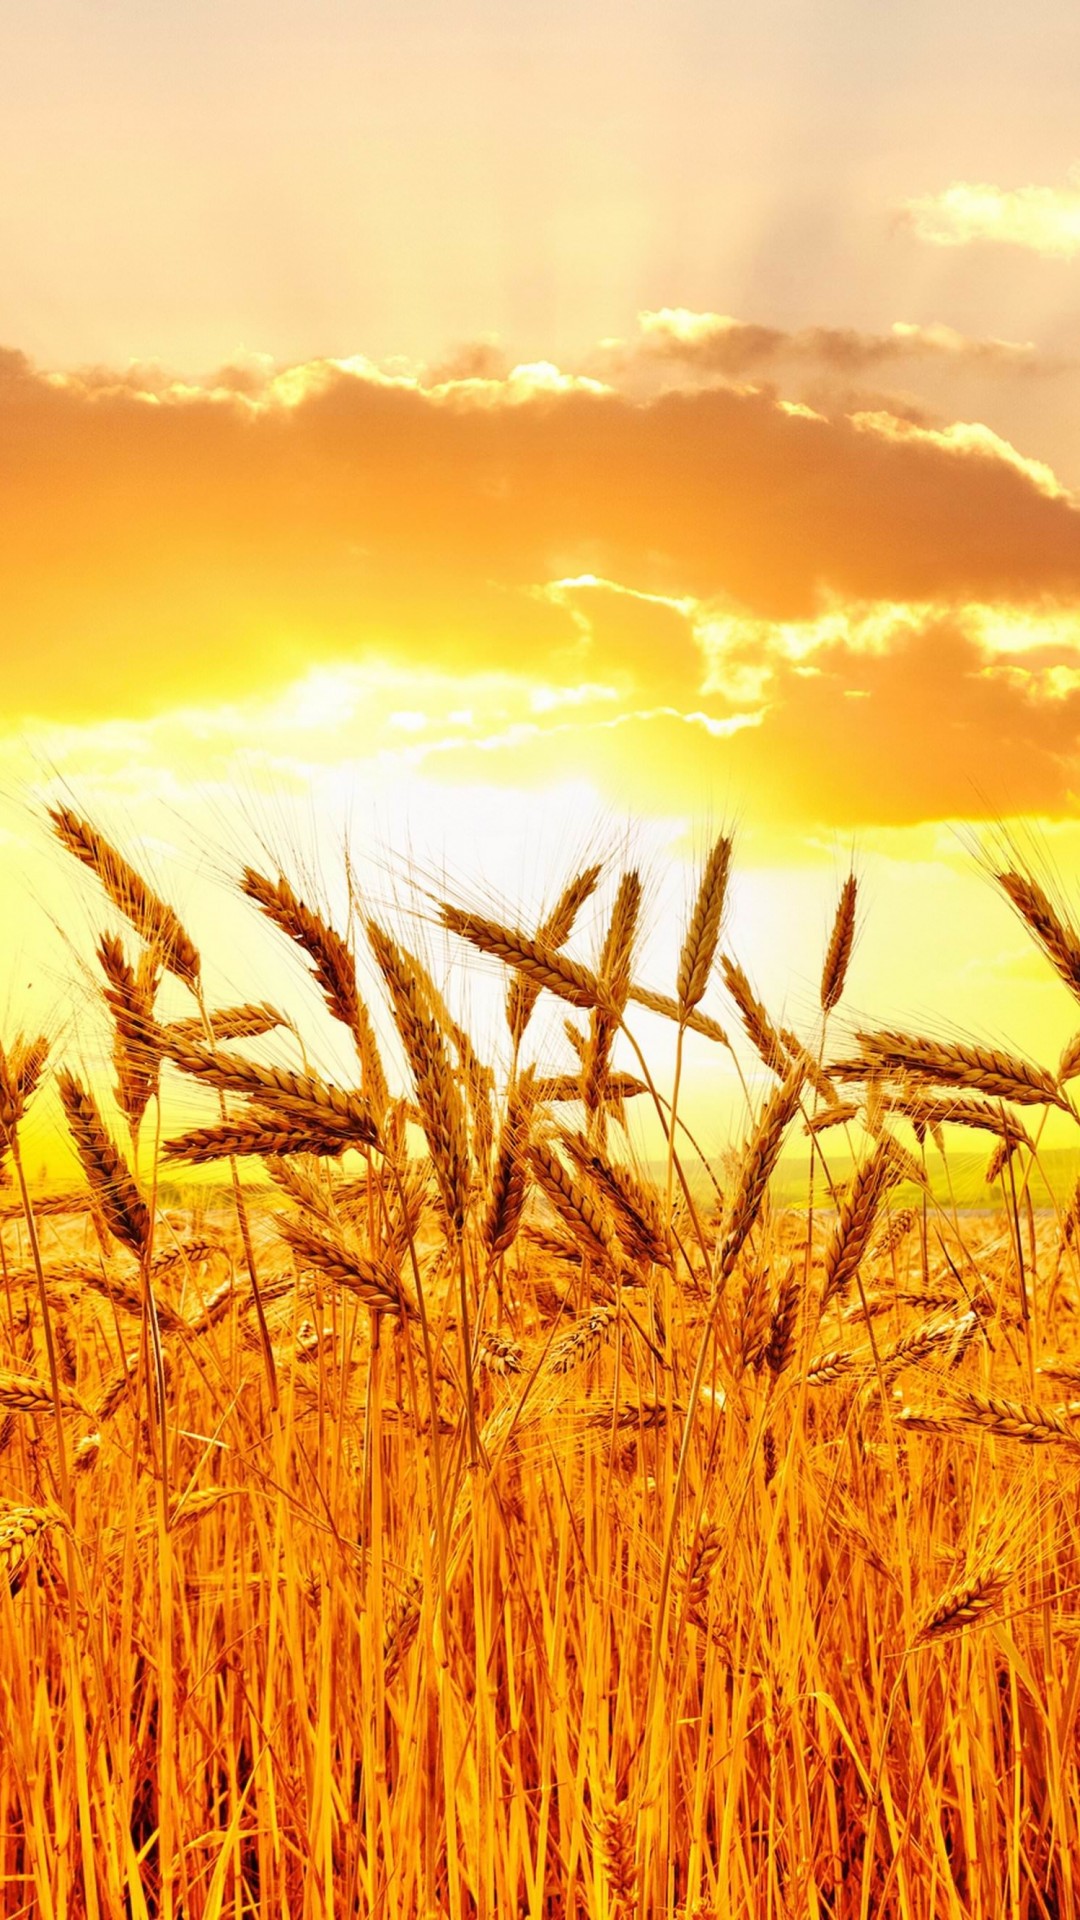 Golden Wheat Field At Sunset Wallpaper for SAMSUNG Galaxy Note 3